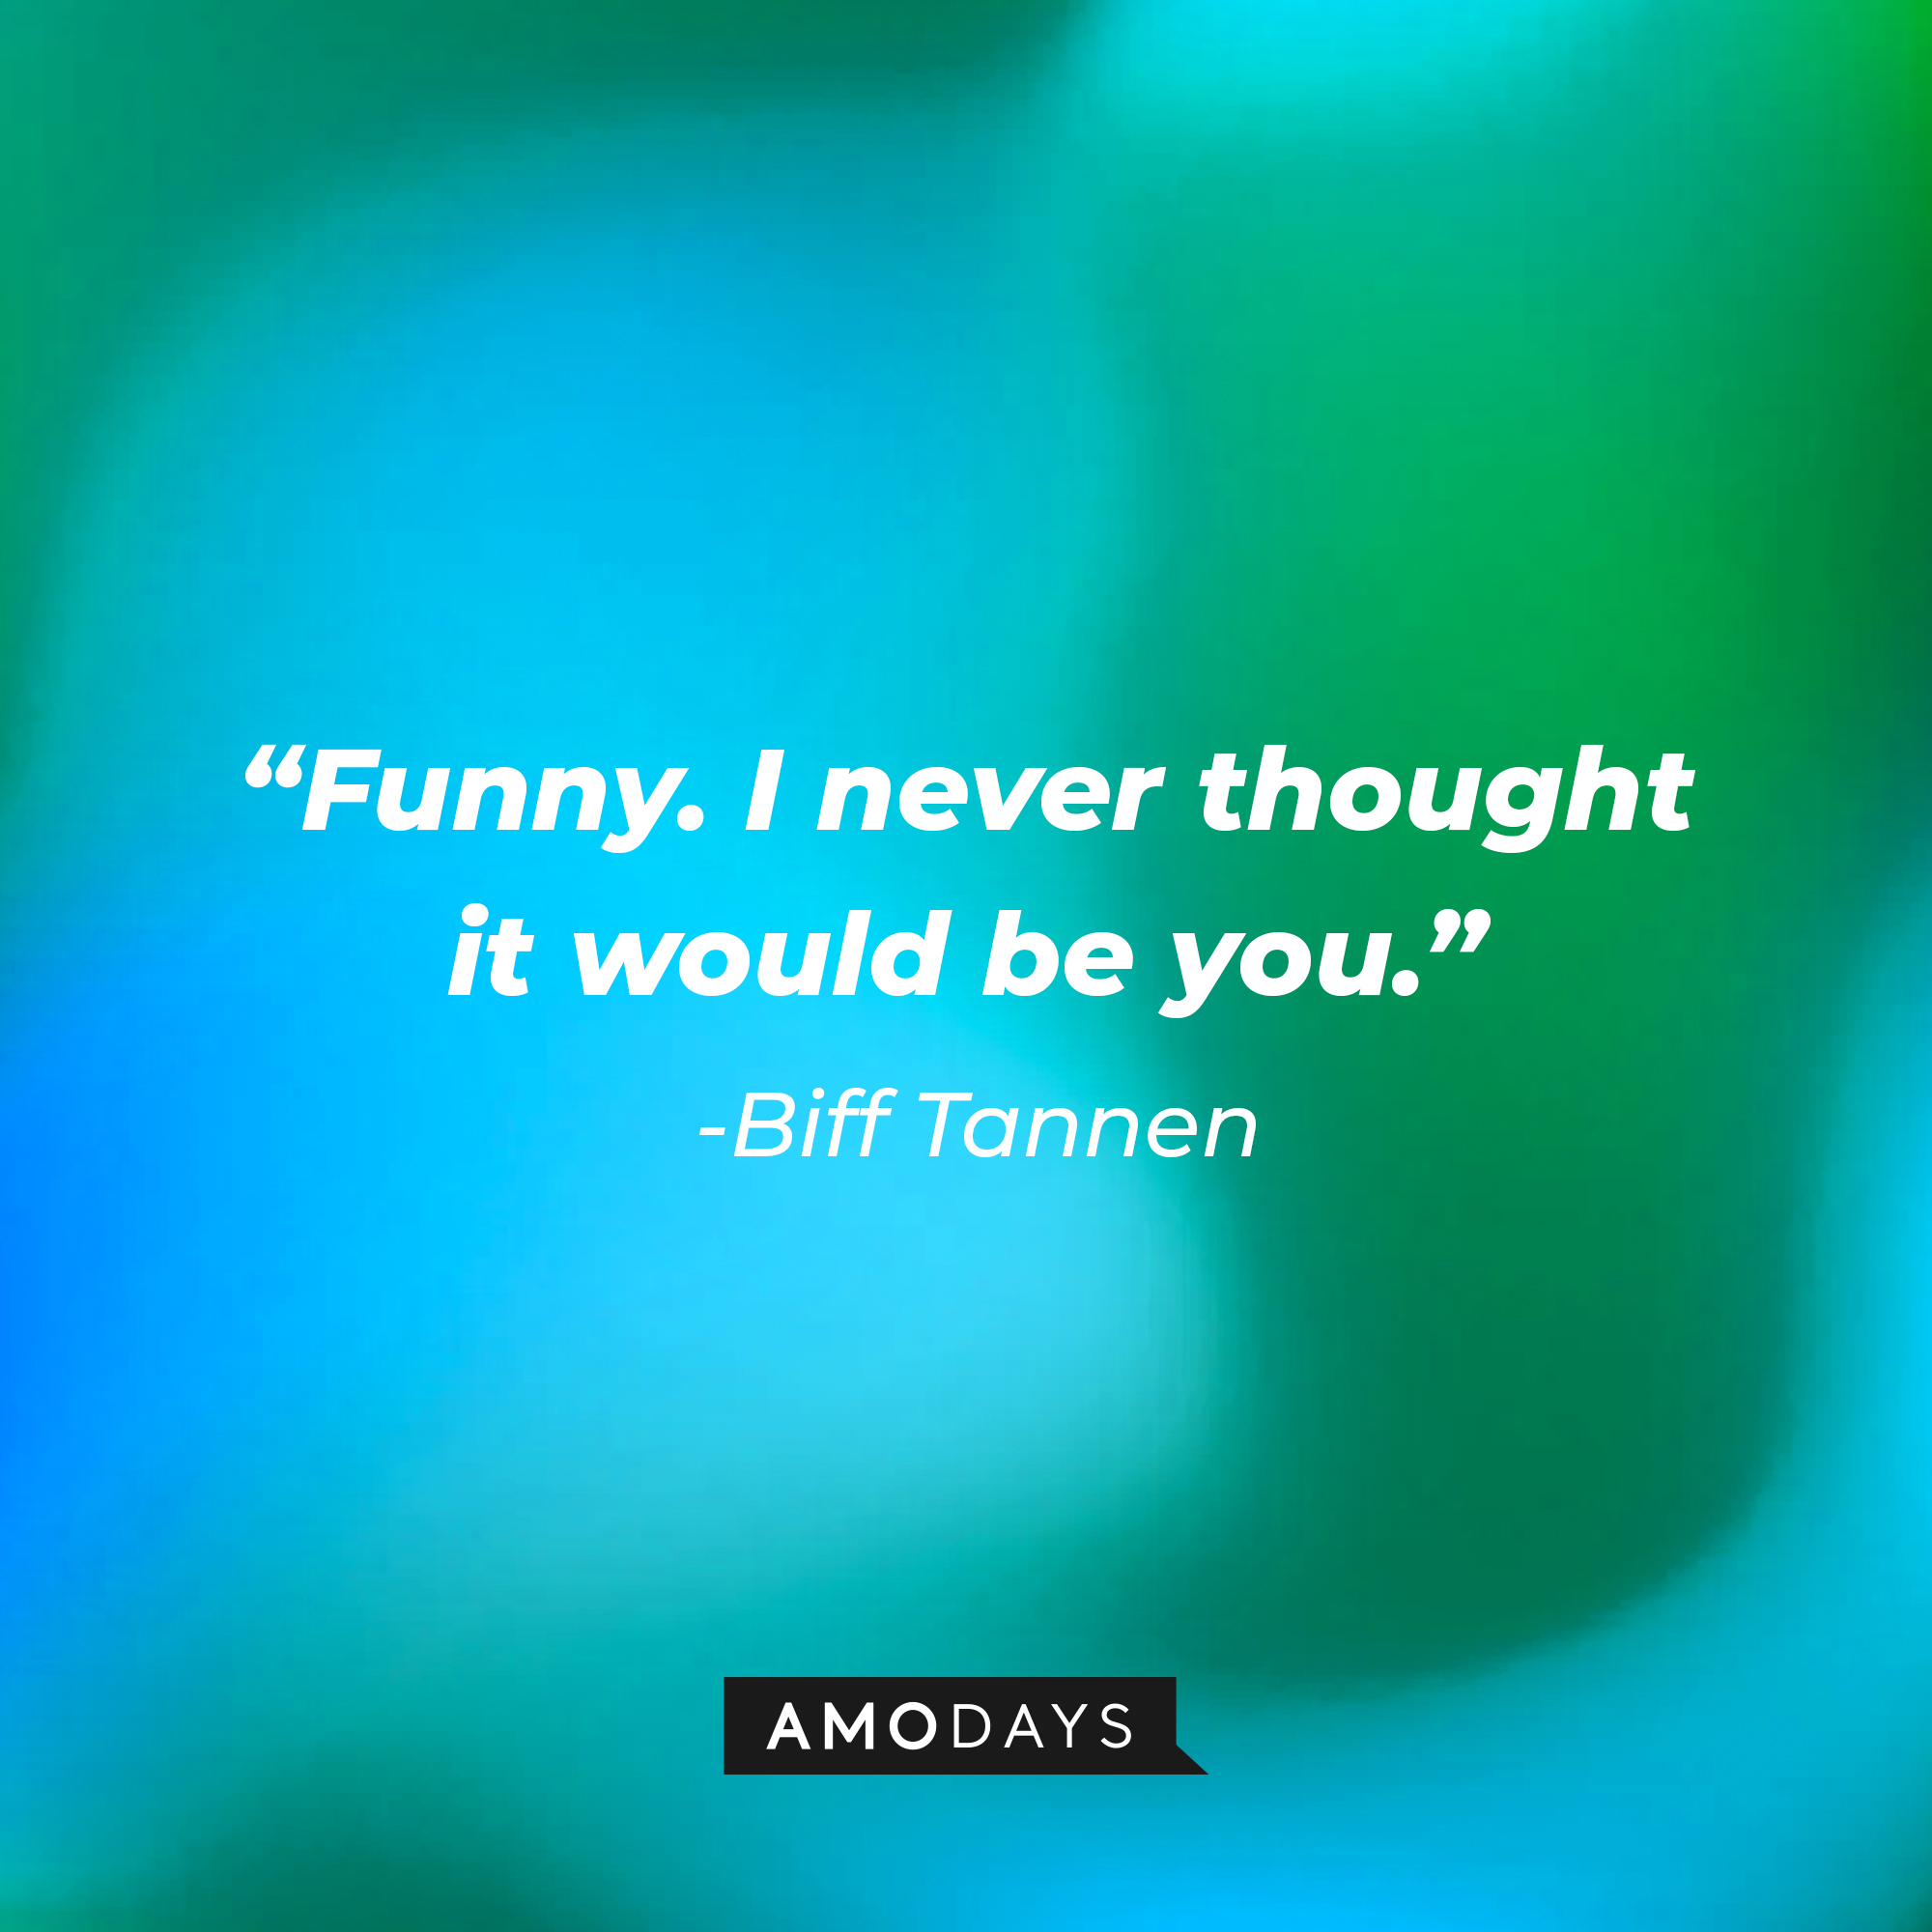 Biff Tannen’s quote: “Funny. I never thought it would be you.” | Source: AmoDays